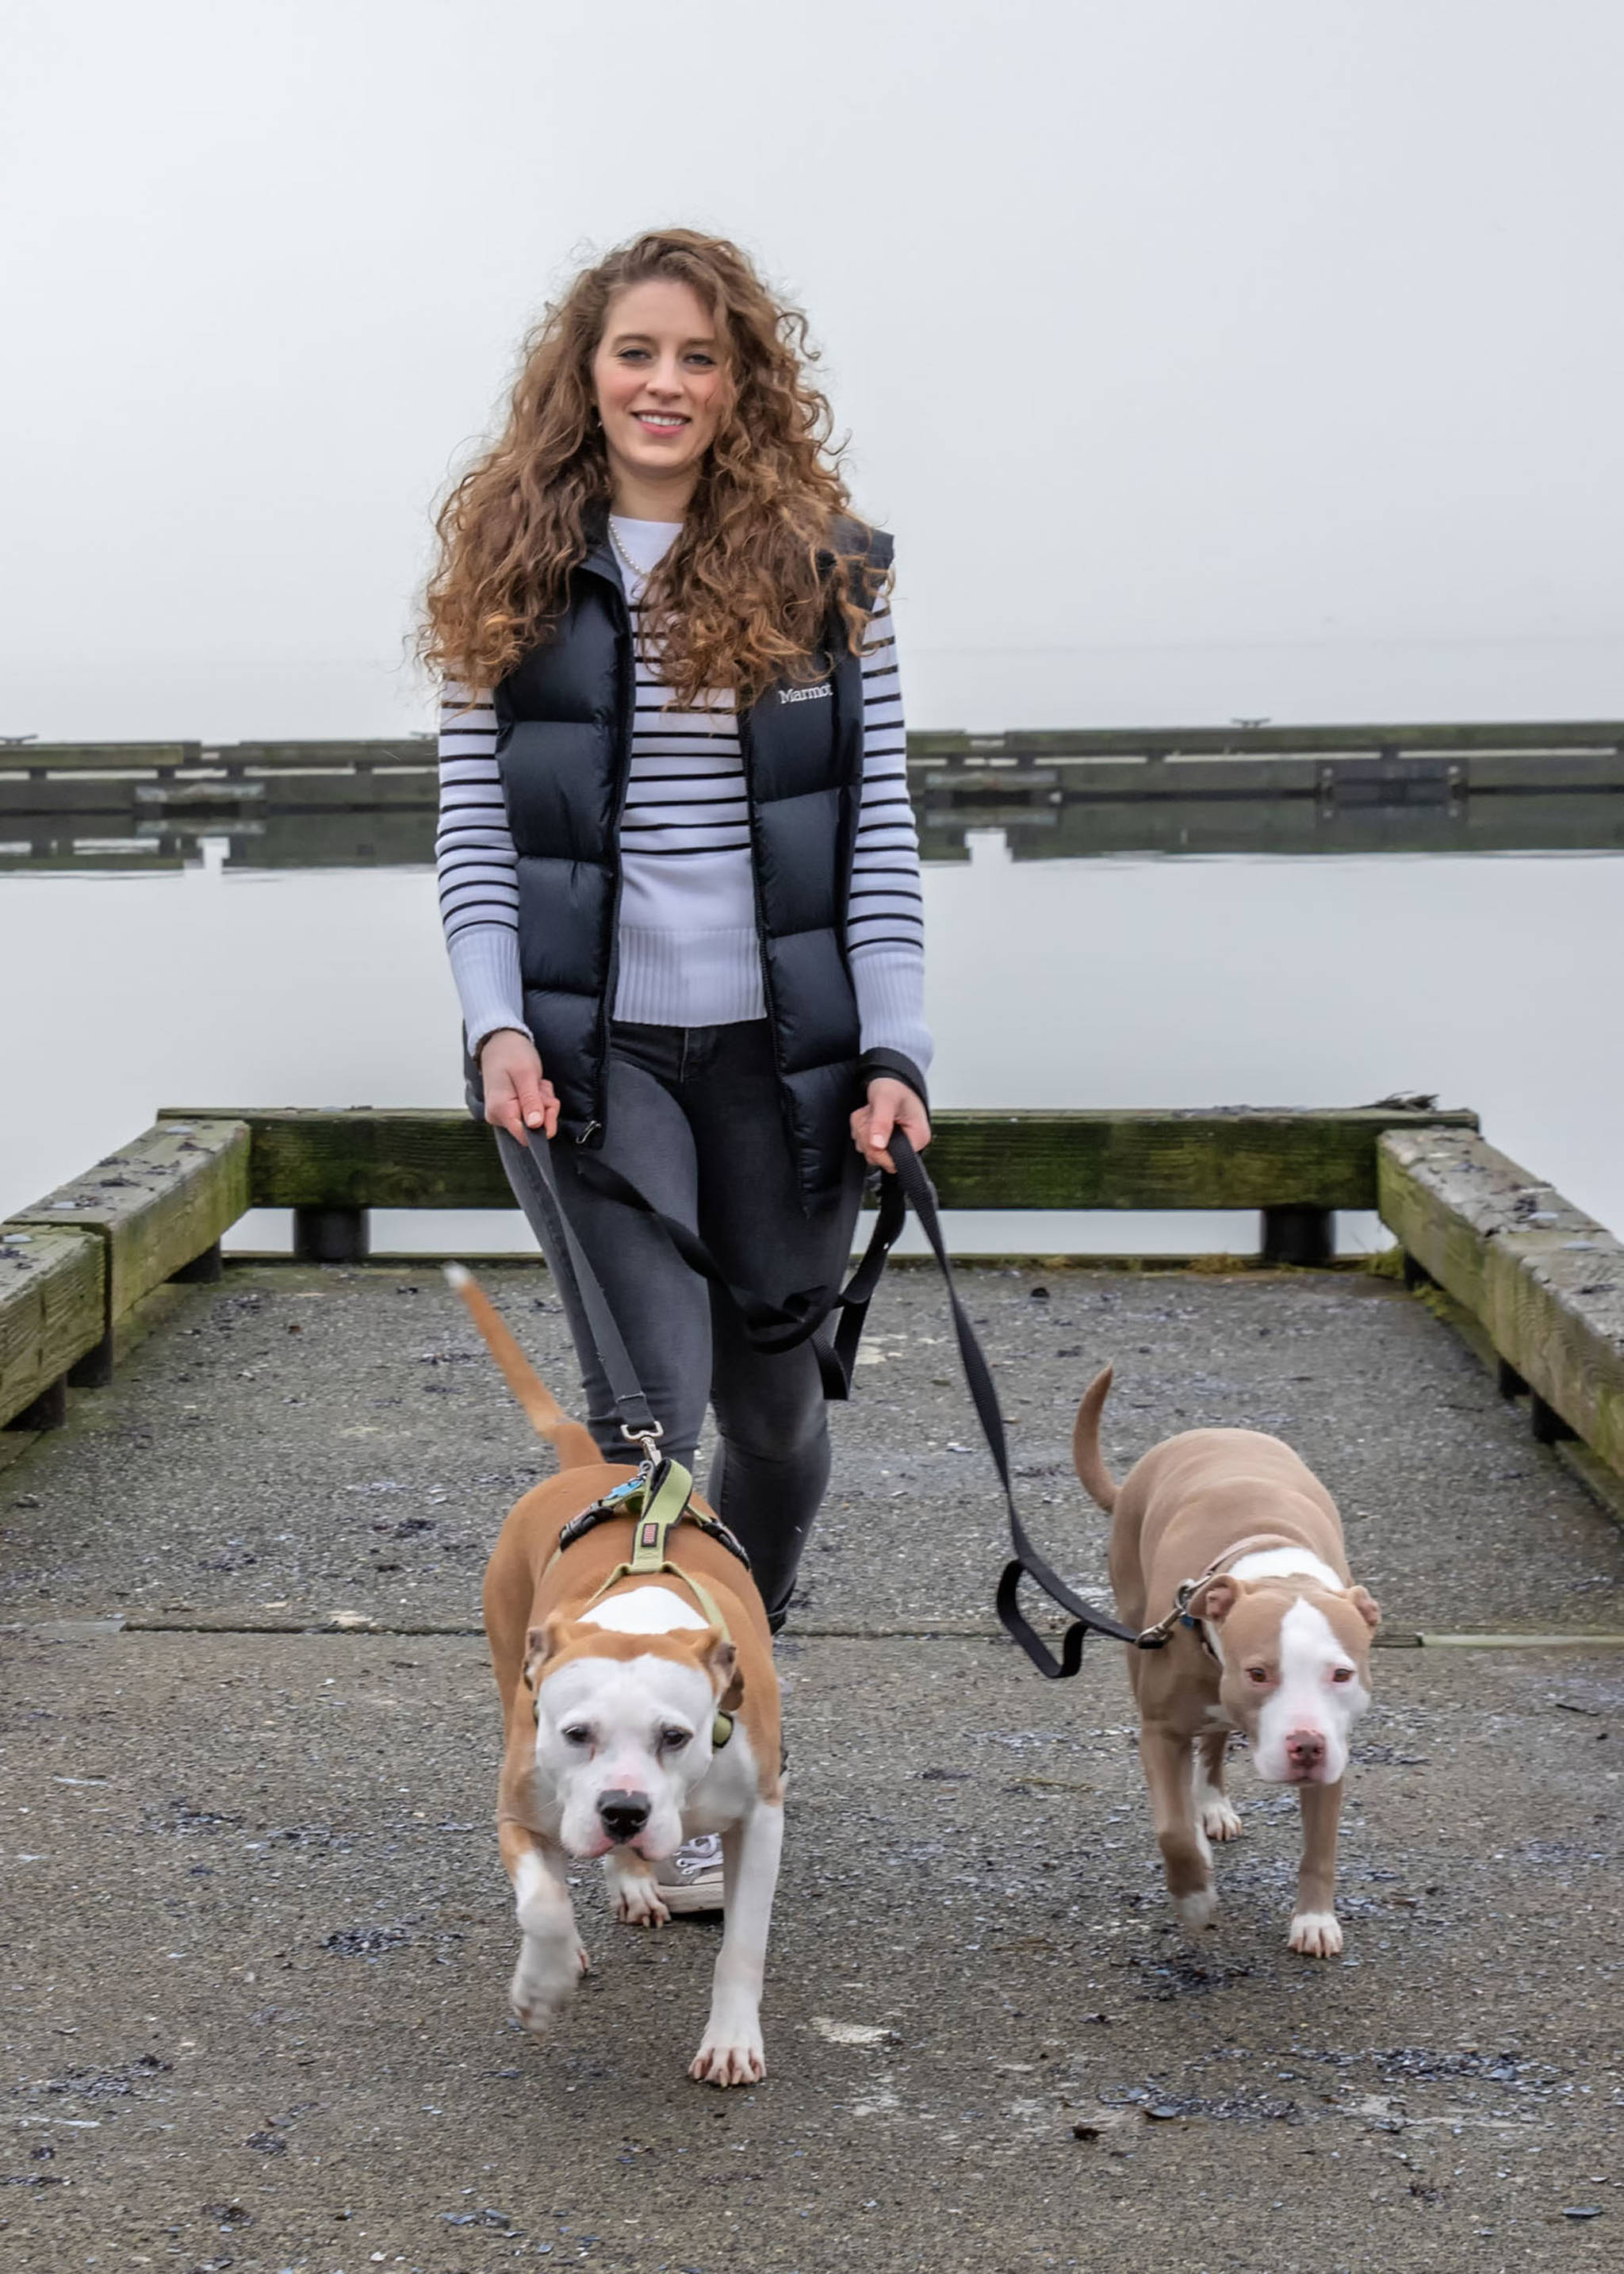 Feb. 10, 2019: No matter what the weather, dogs always need to be walked. You might as well do it in style! On this foggy day, Alicia Harris chose classic standards for her outing with her dogs Cooper and Diamond: a black and white striped J.Crew sweater, Levi’s jeans, Converse sneakers and a black Marmot vest for warmth. And, regardless of her outfit or the occasion, Alicia always wears her signature string of pearls.